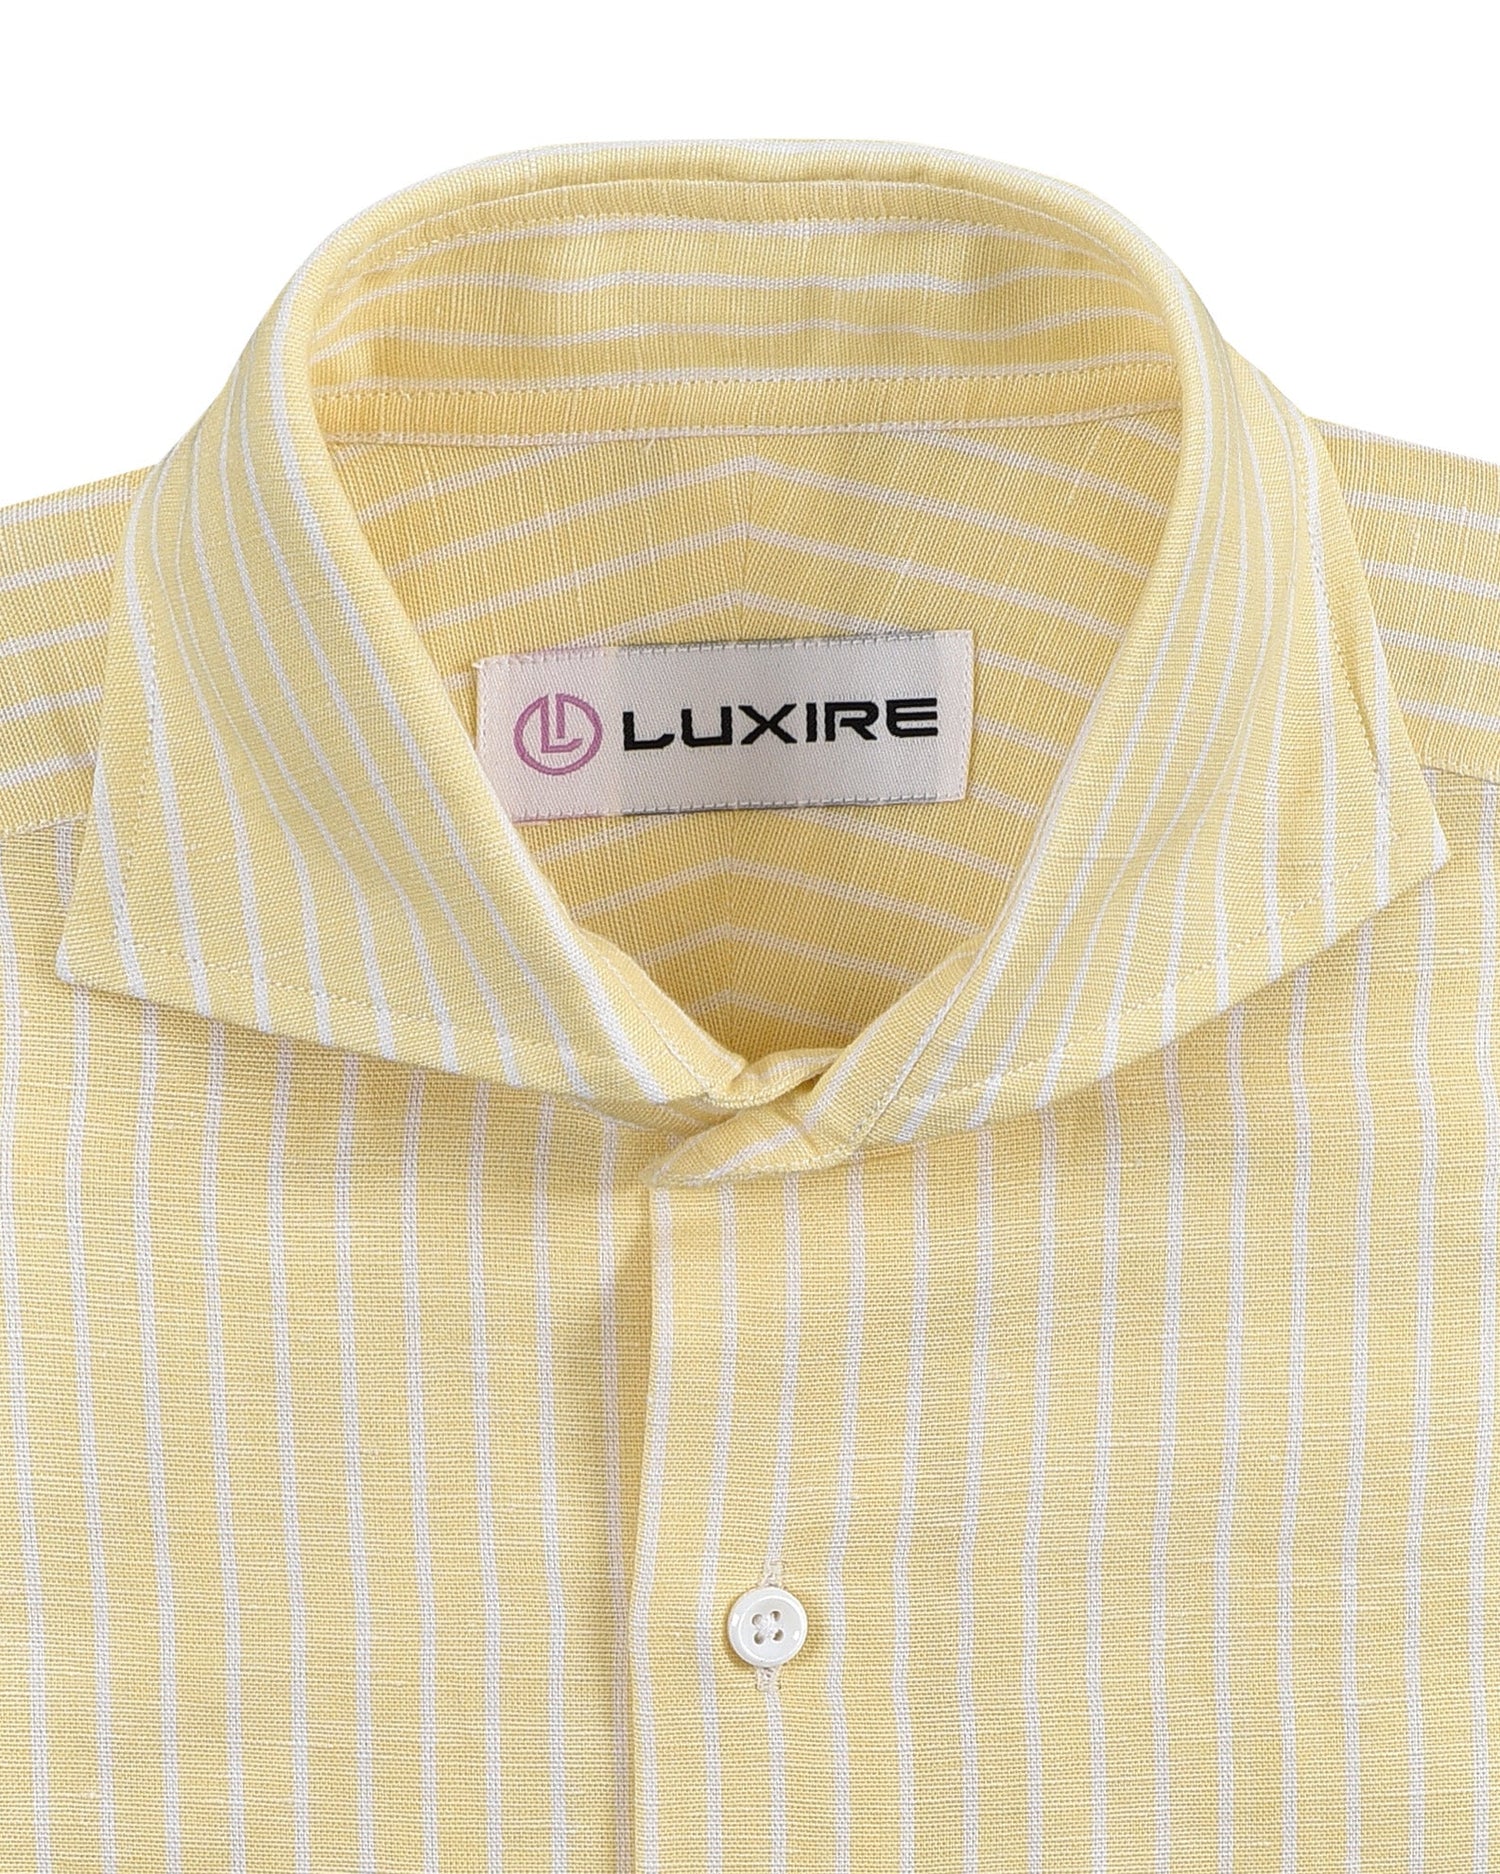 Collar of the custom linen shirt for men in pastel yellow with white stripes by Luxire Clothing